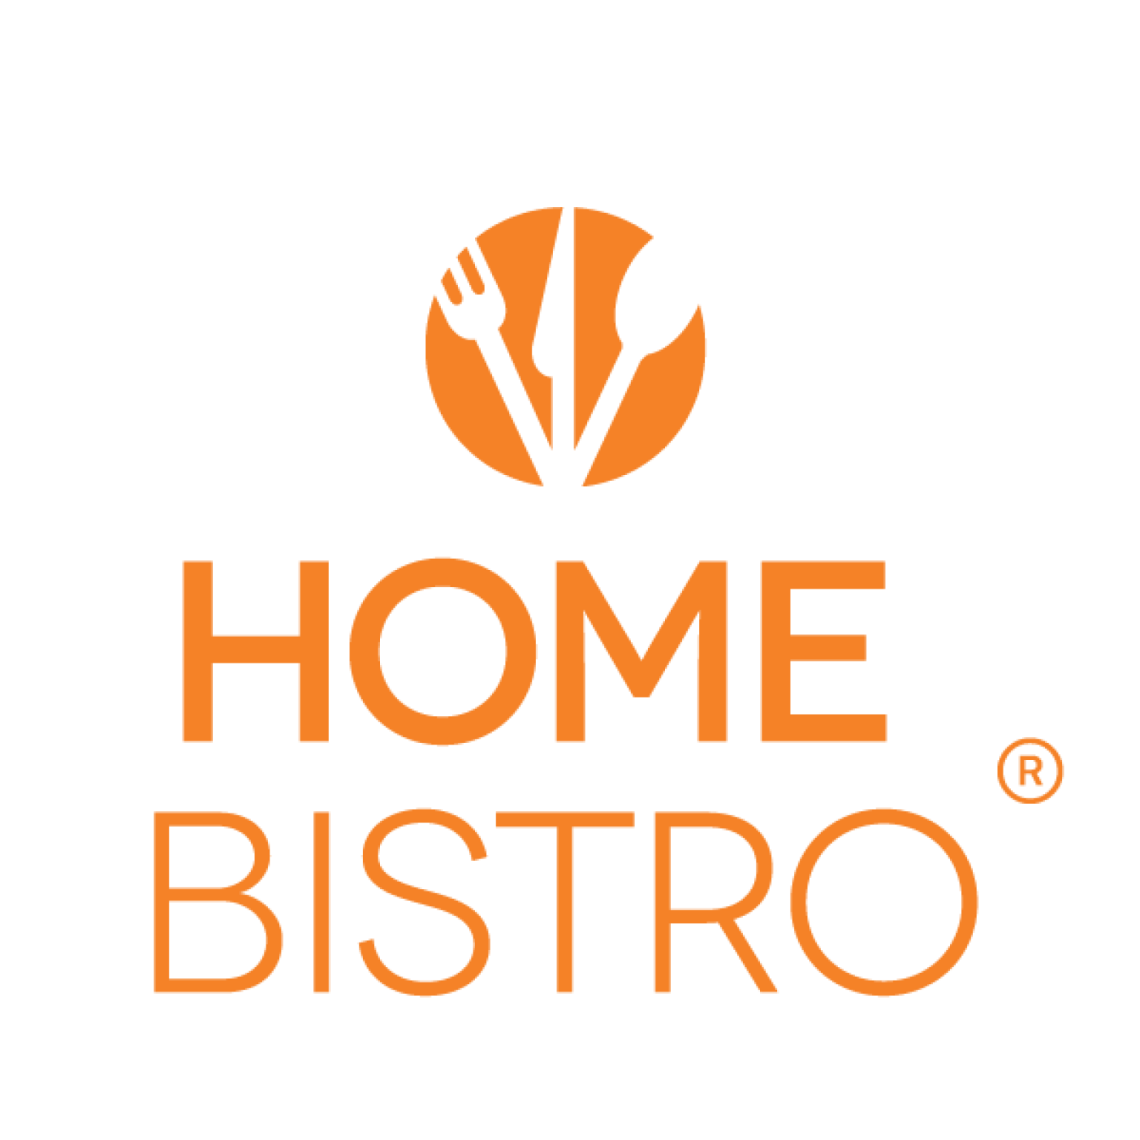 Home Bistro Announces Partnership with Perfecting Athletes